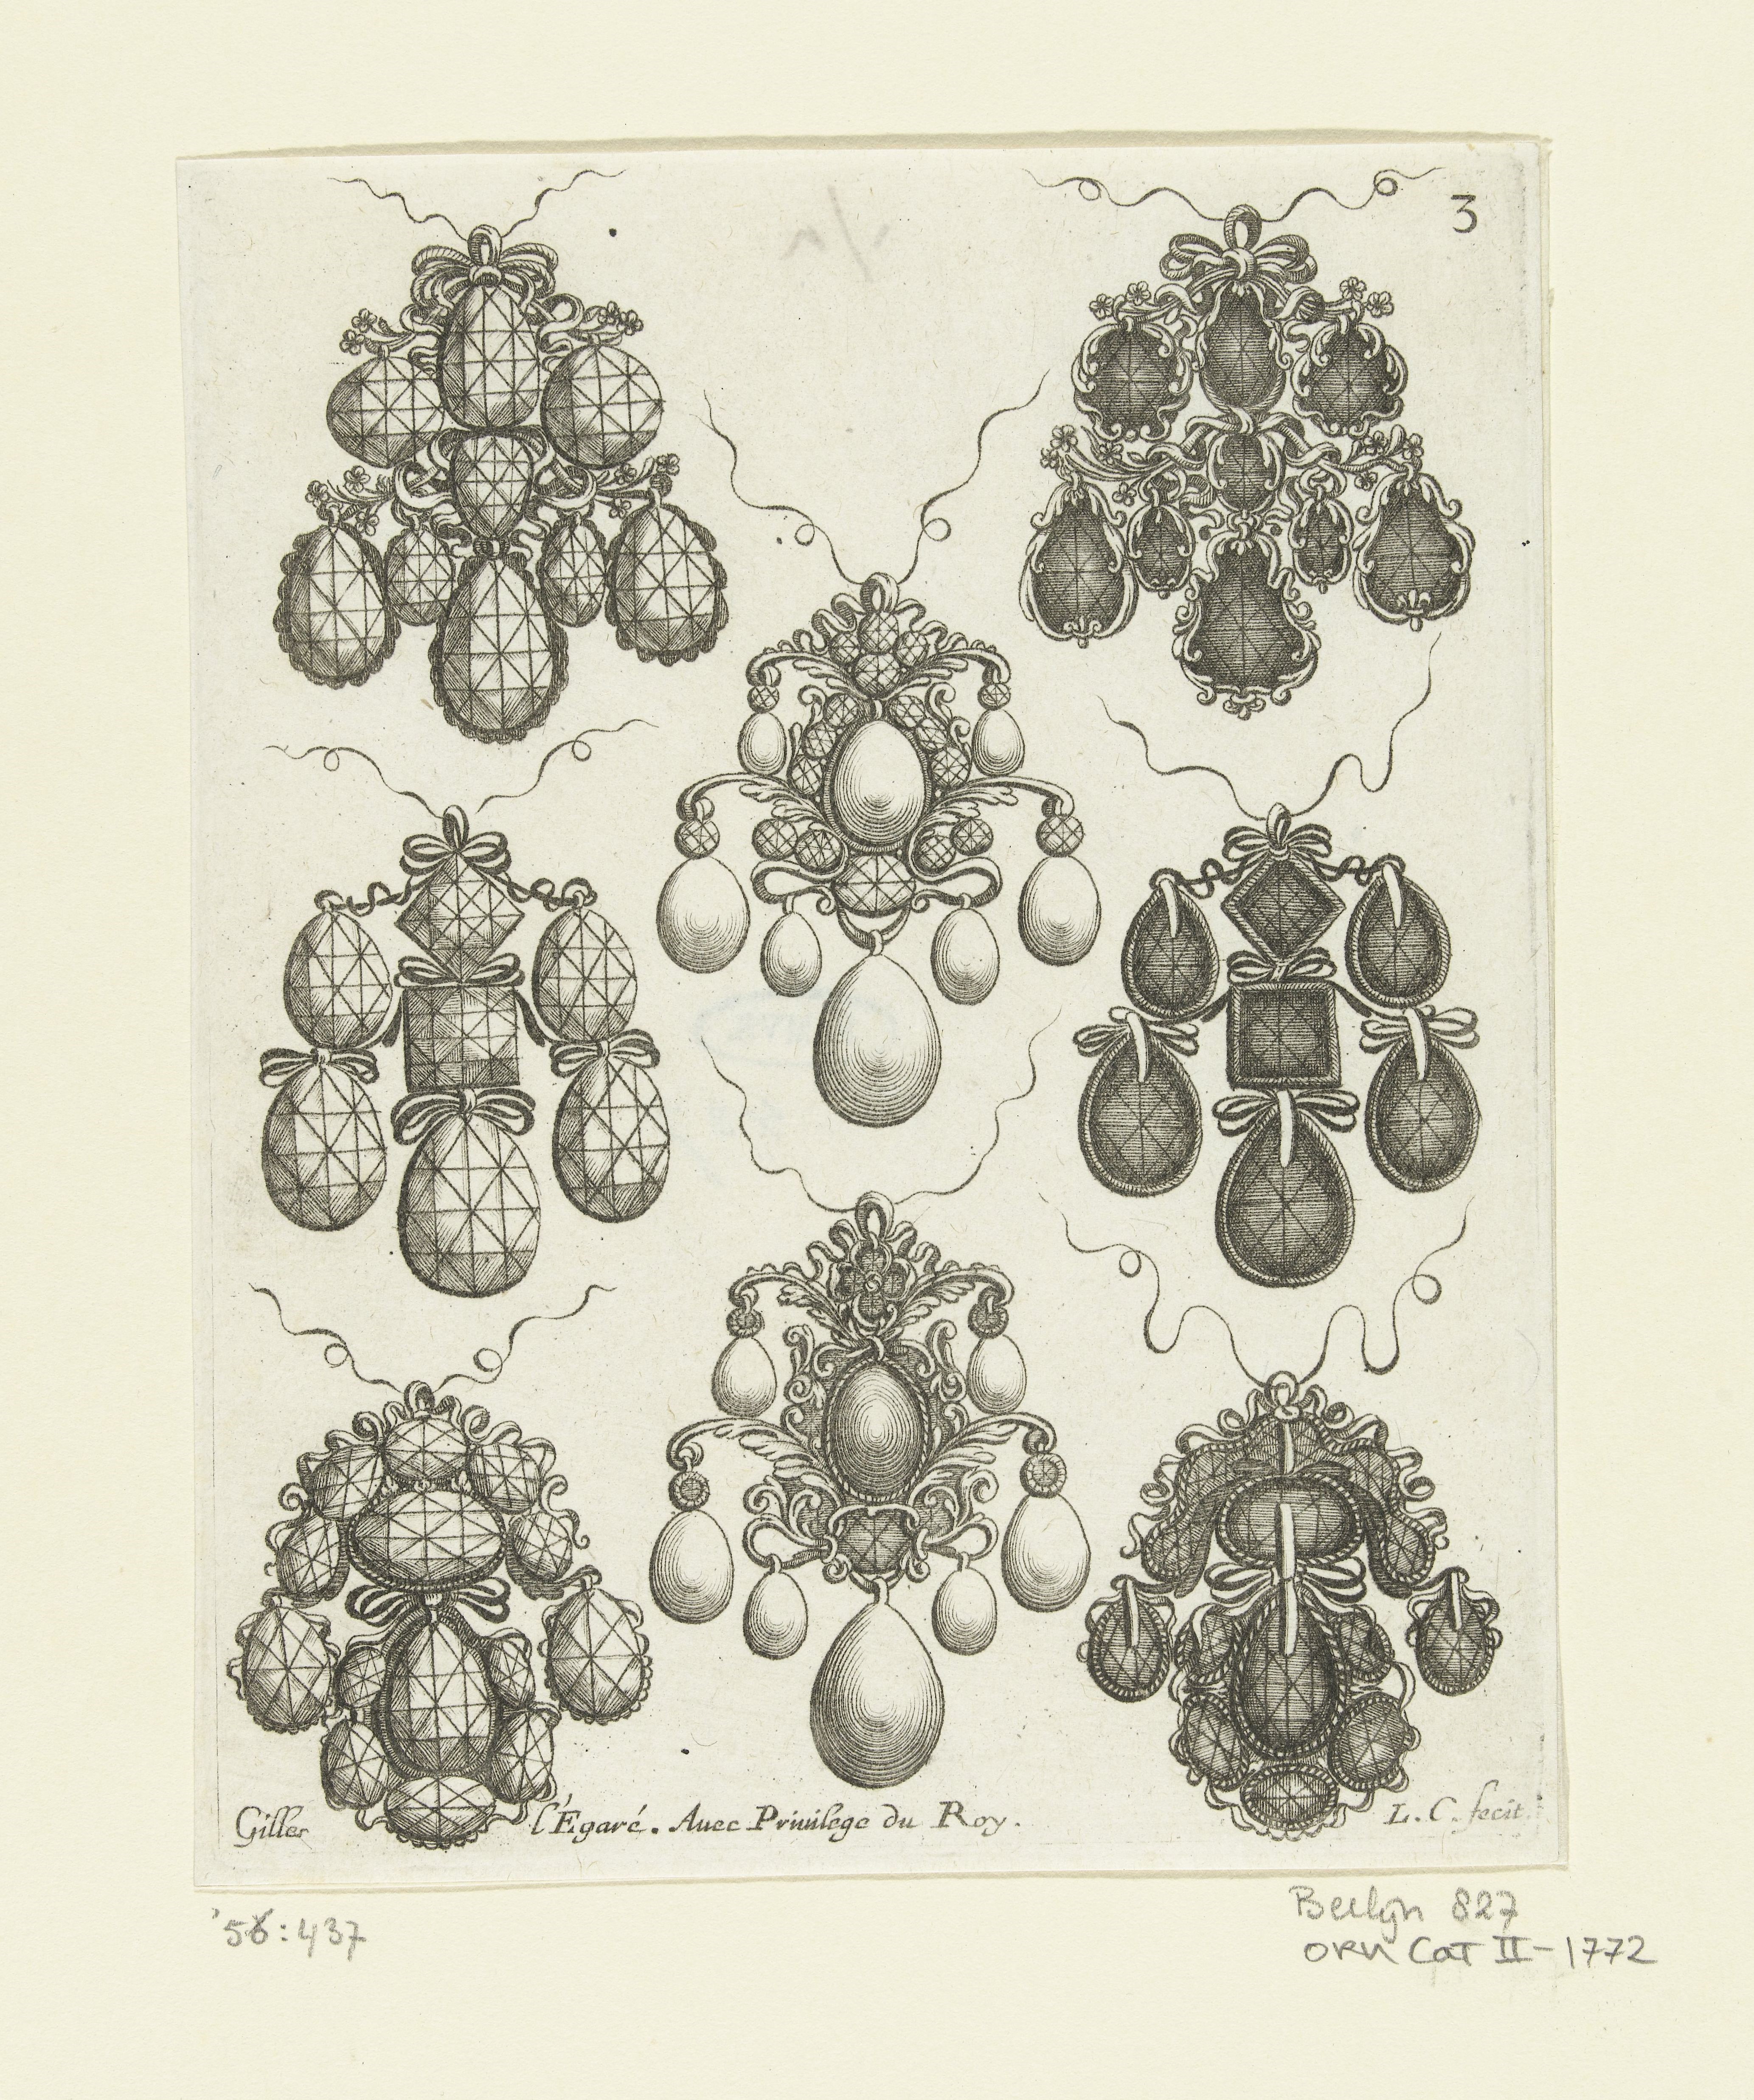 A jeweller’s sketch in brown ink on white paper showing designs for eight ornate pendant earrings.